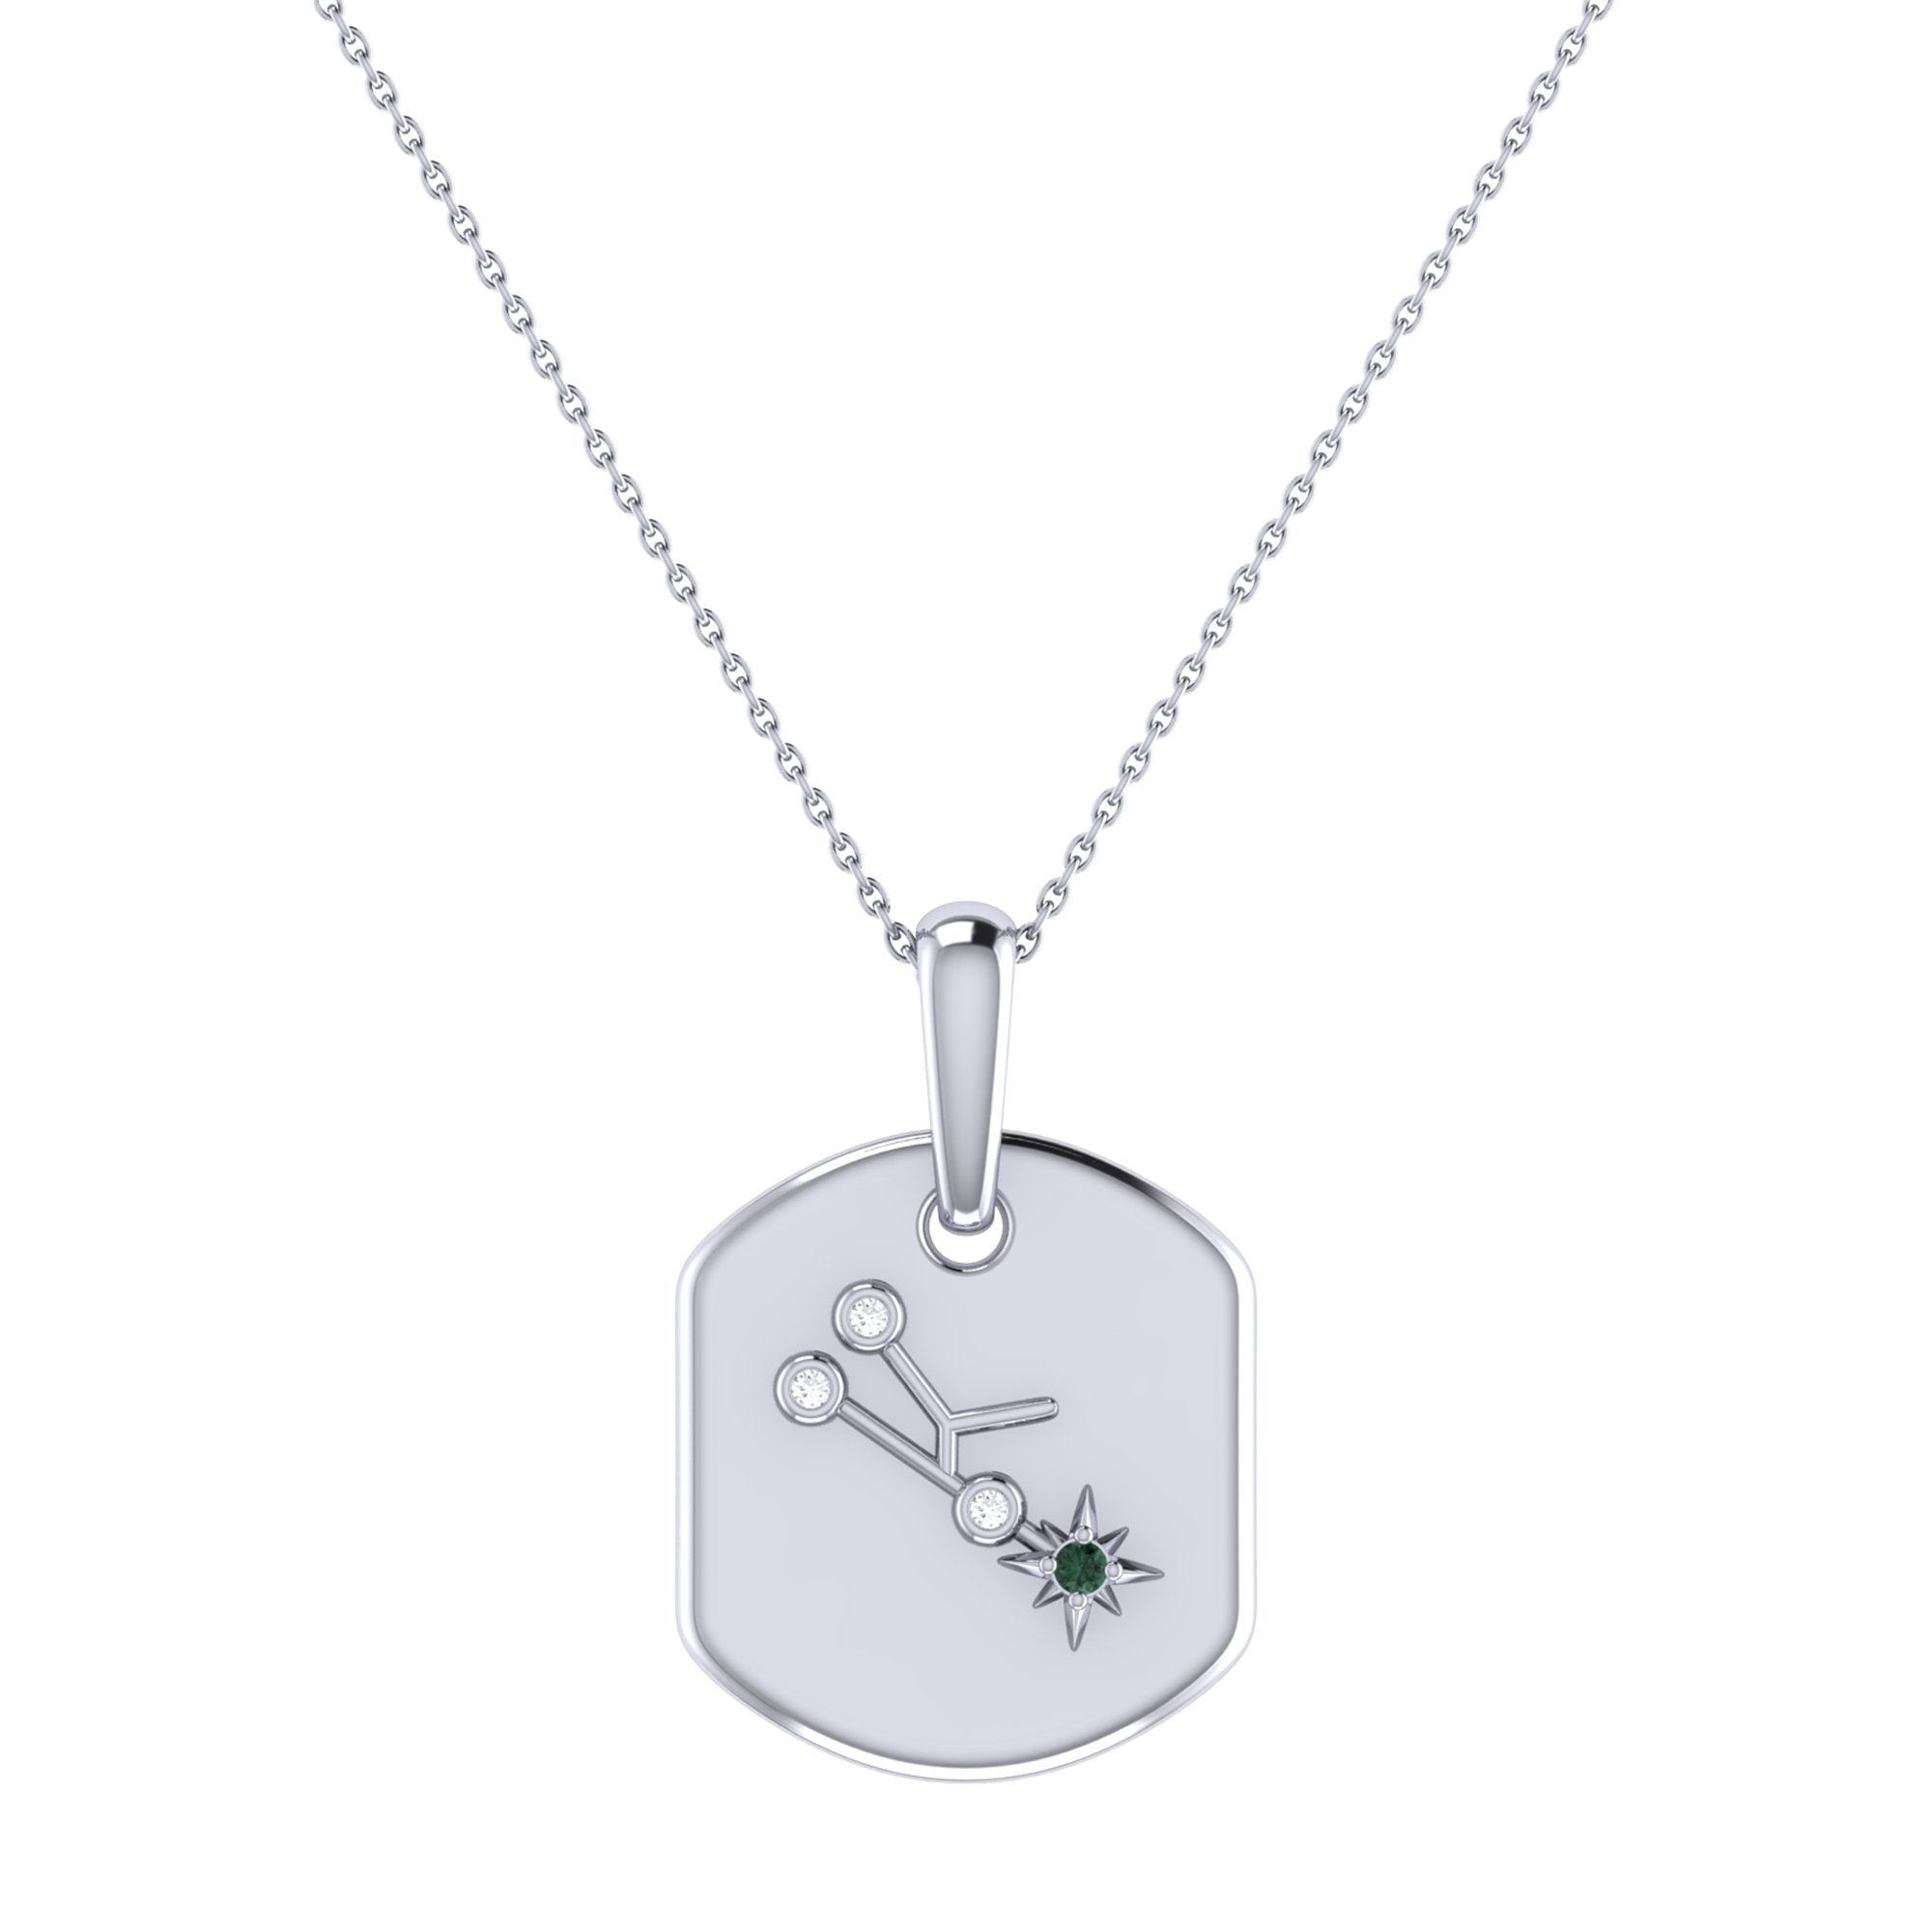 Taurus Bull Emerald & Diamond Pendant Necklace: A Symbol of Loyalty and Stability - Jewelry & Watches - Bijou Her -  -  - 